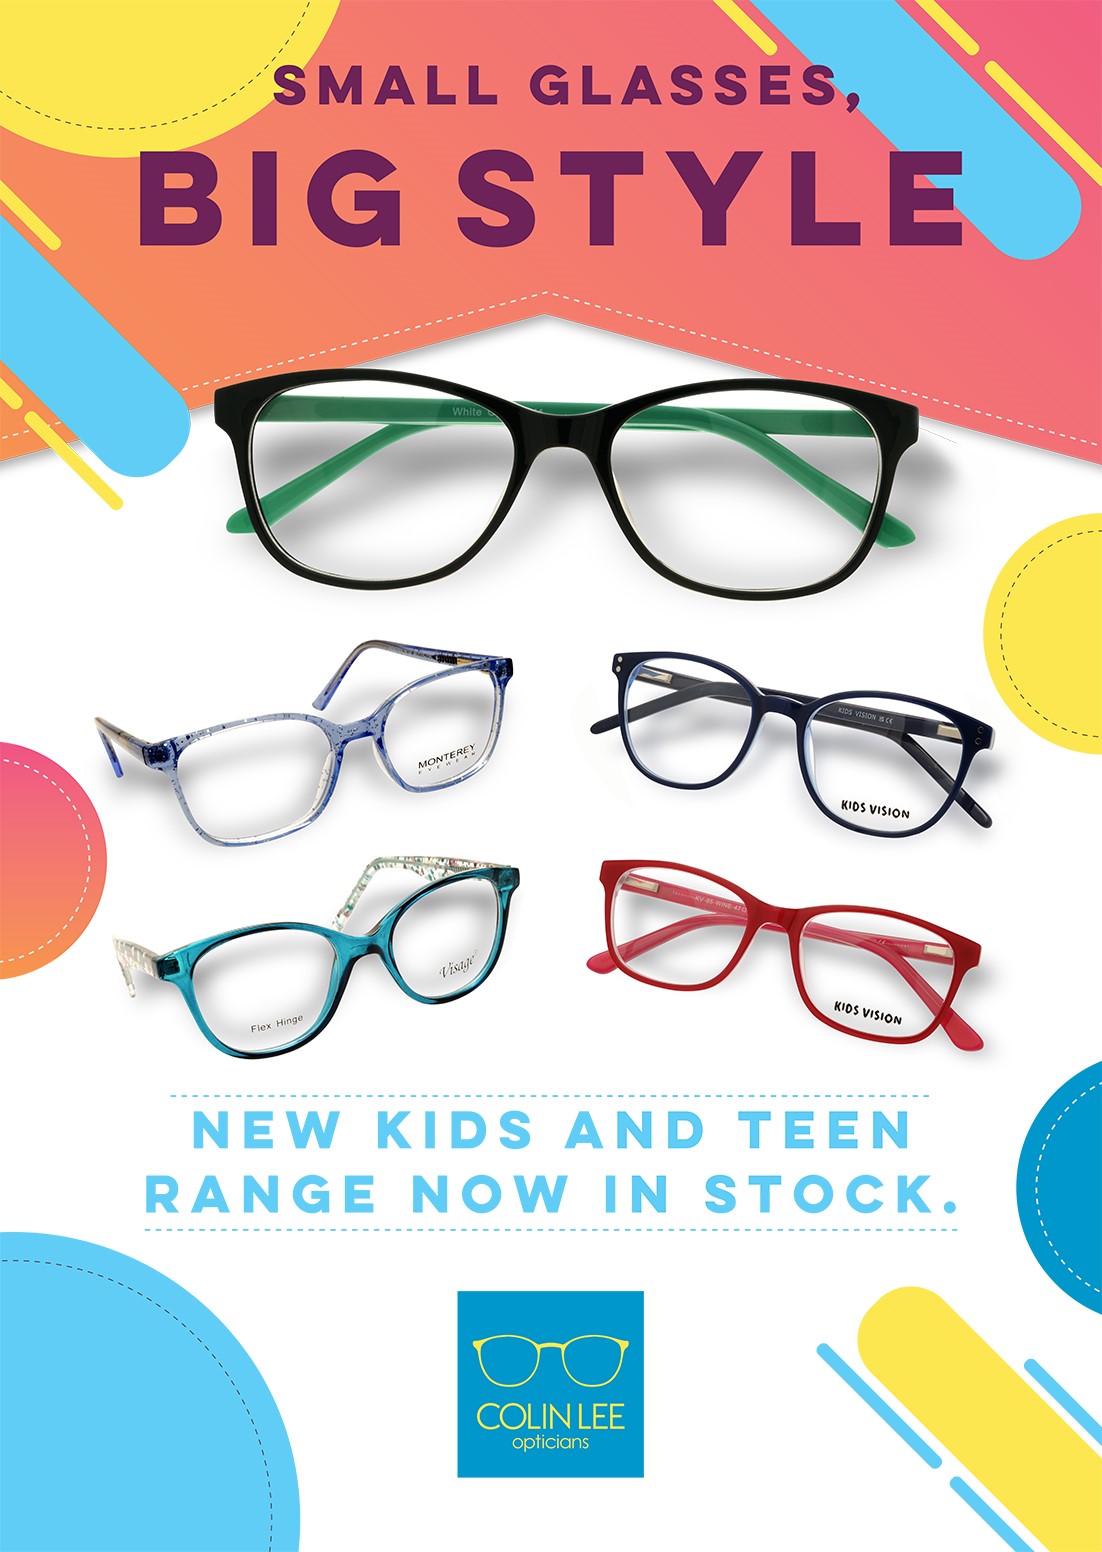 New Kids and Teen range now in stock